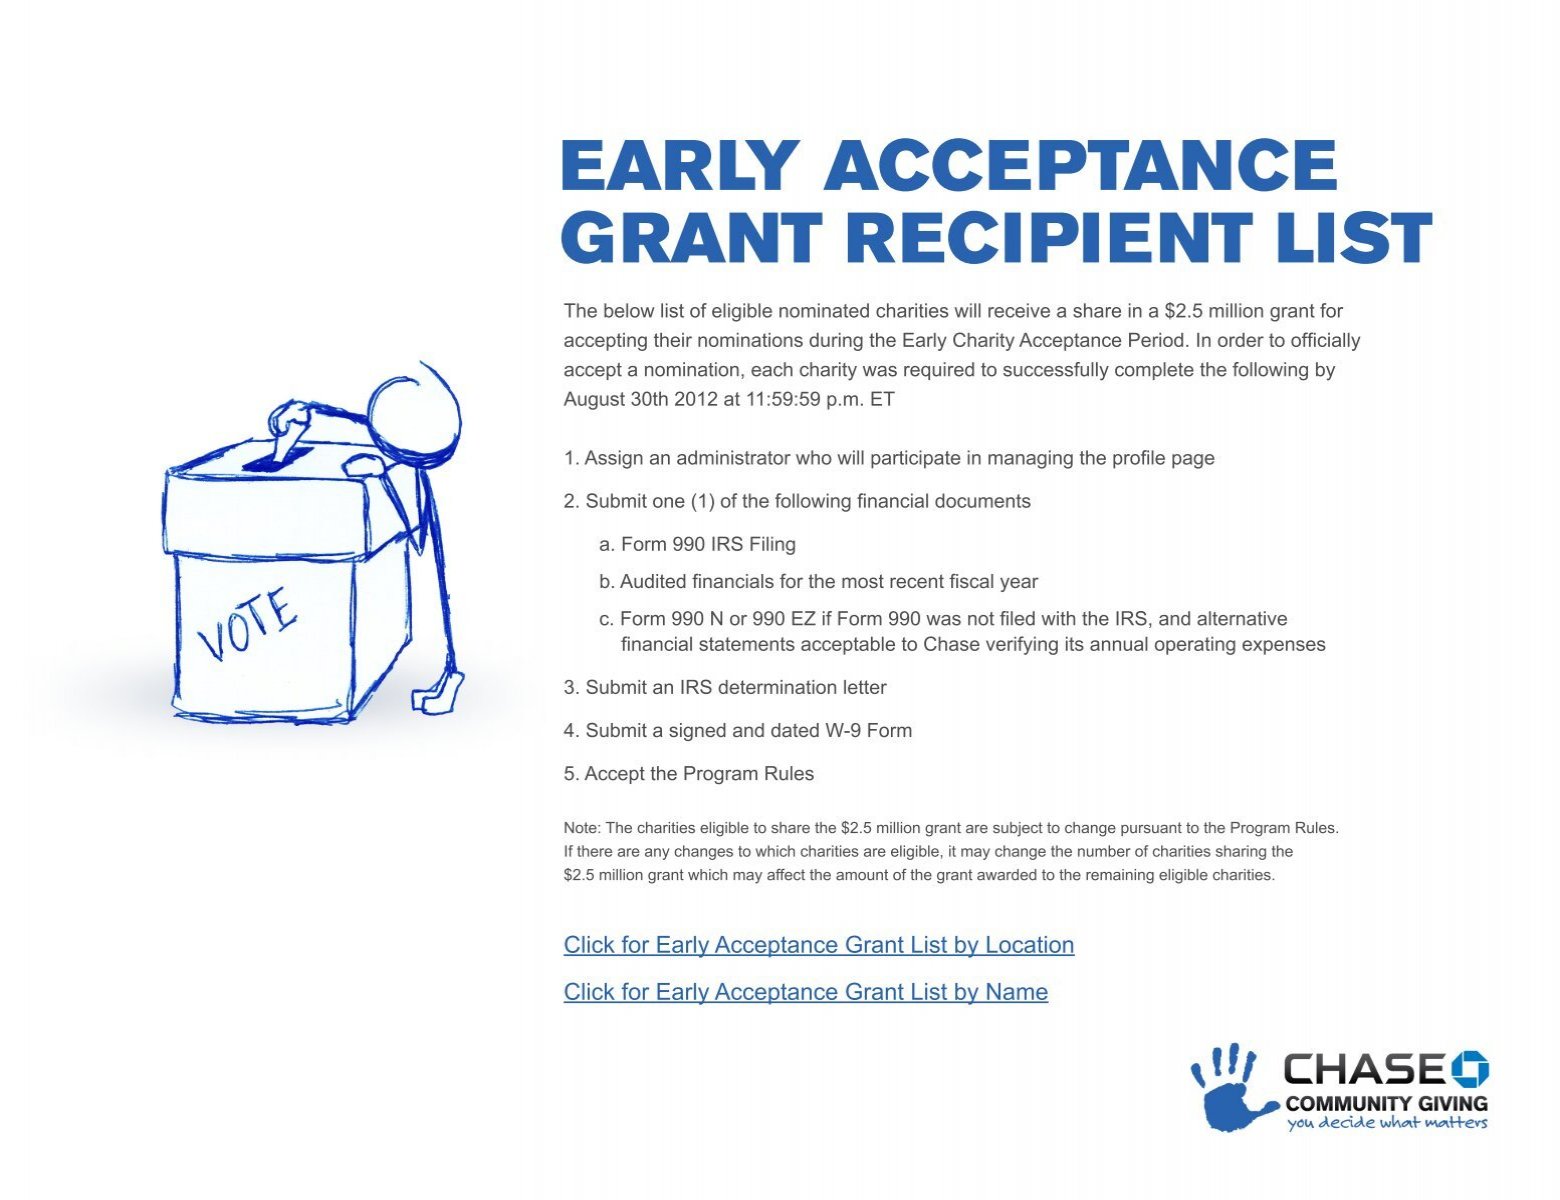 EARLY ACCEPTANCE GRANT RECIPIENT LIST